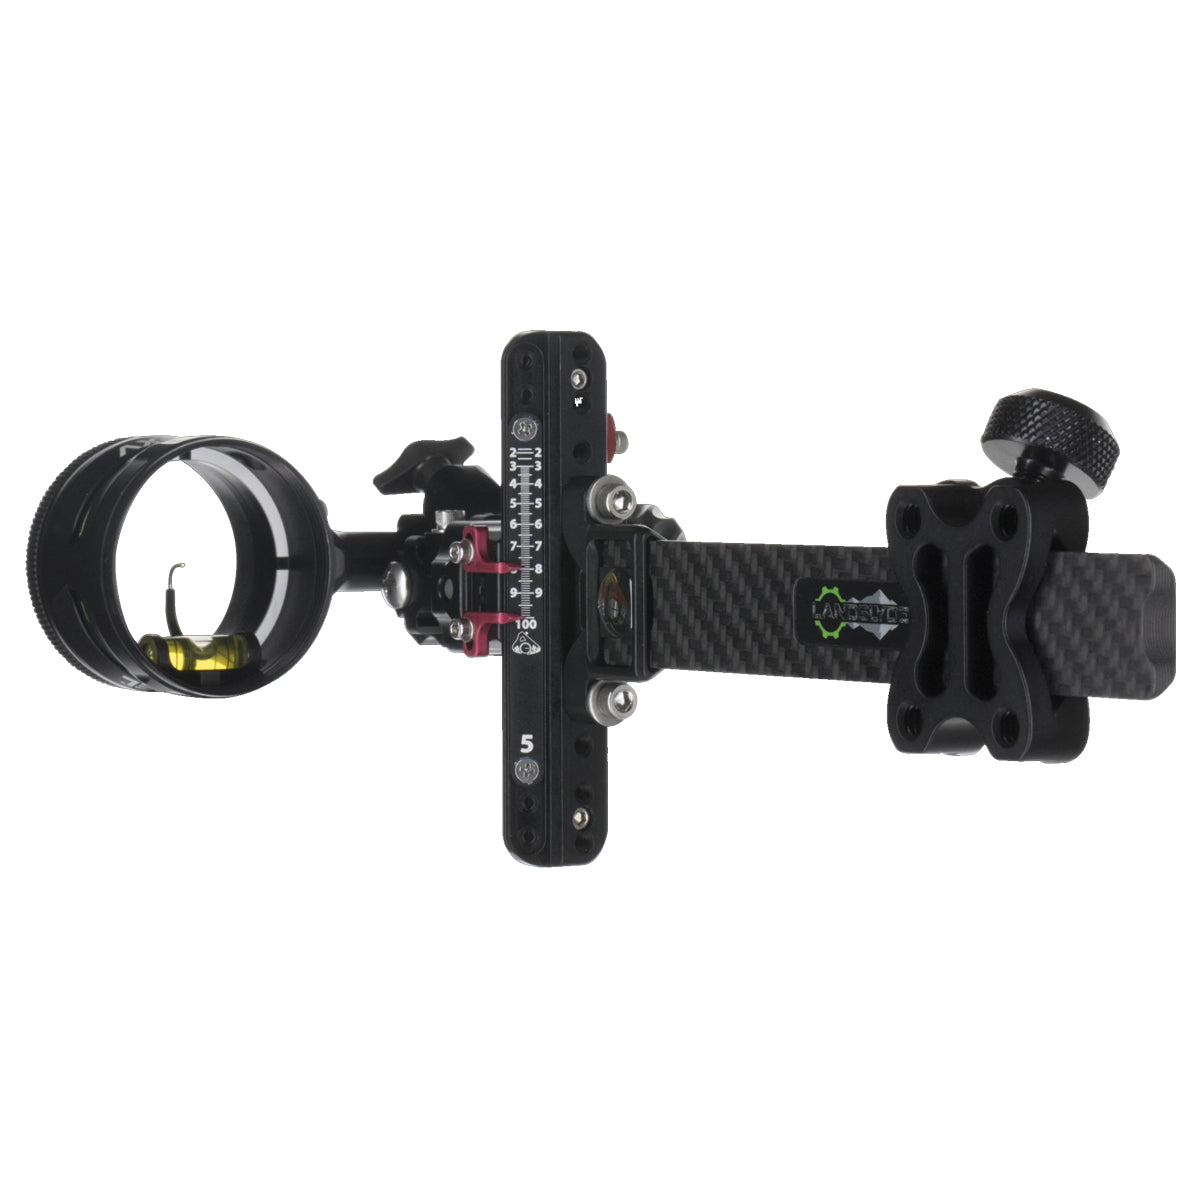 Axcel Landslyde Carbon Pro 3 Pin Bow Sight in  by GOHUNT | Axcel - GOHUNT Shop